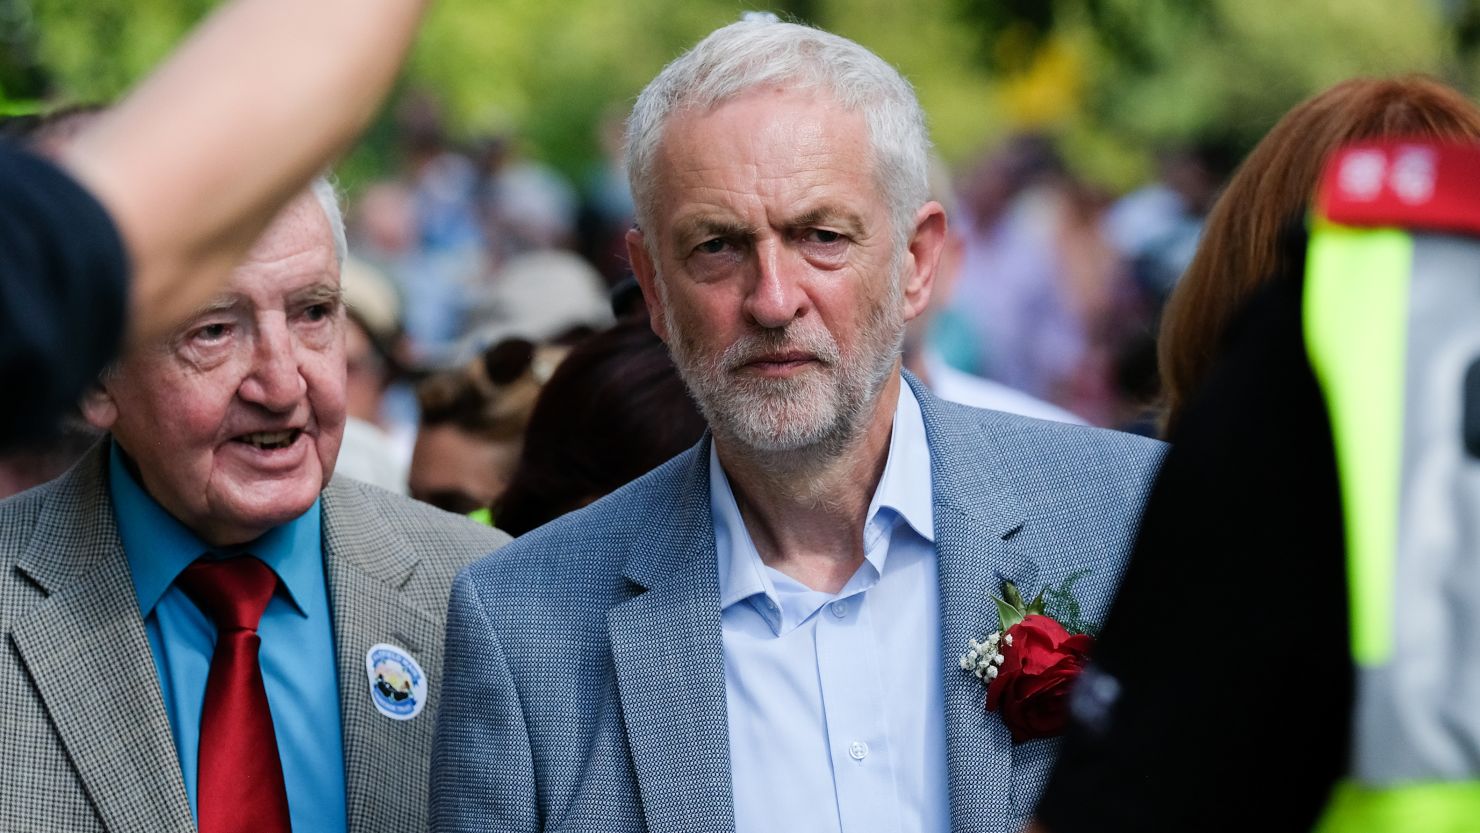 Labour leader Jeremy Corbyn has been accused of fostering an atmosphere of anti-Semitism in his party